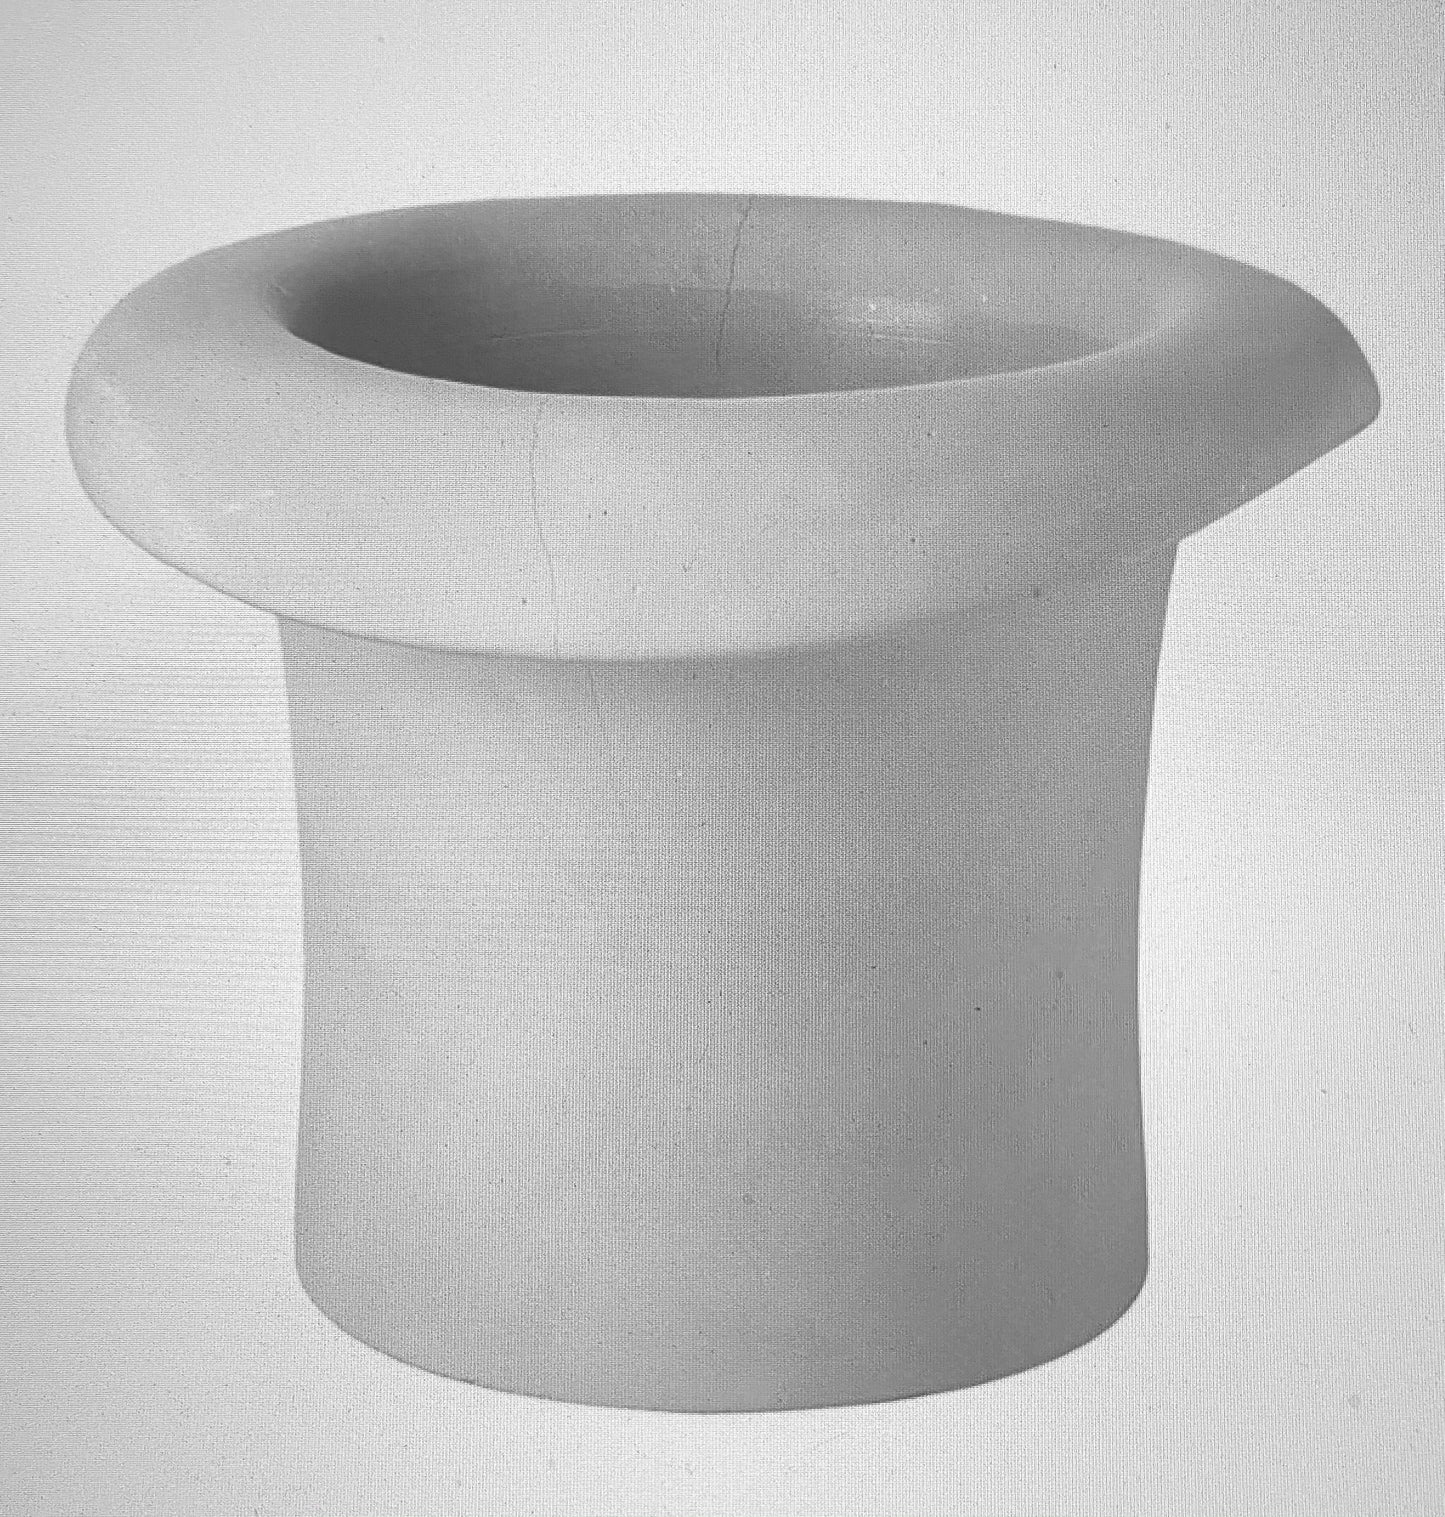 Grey Concrete Hat Planters available in three styles (Straw Hat, Bowler Hat, Top Hat)